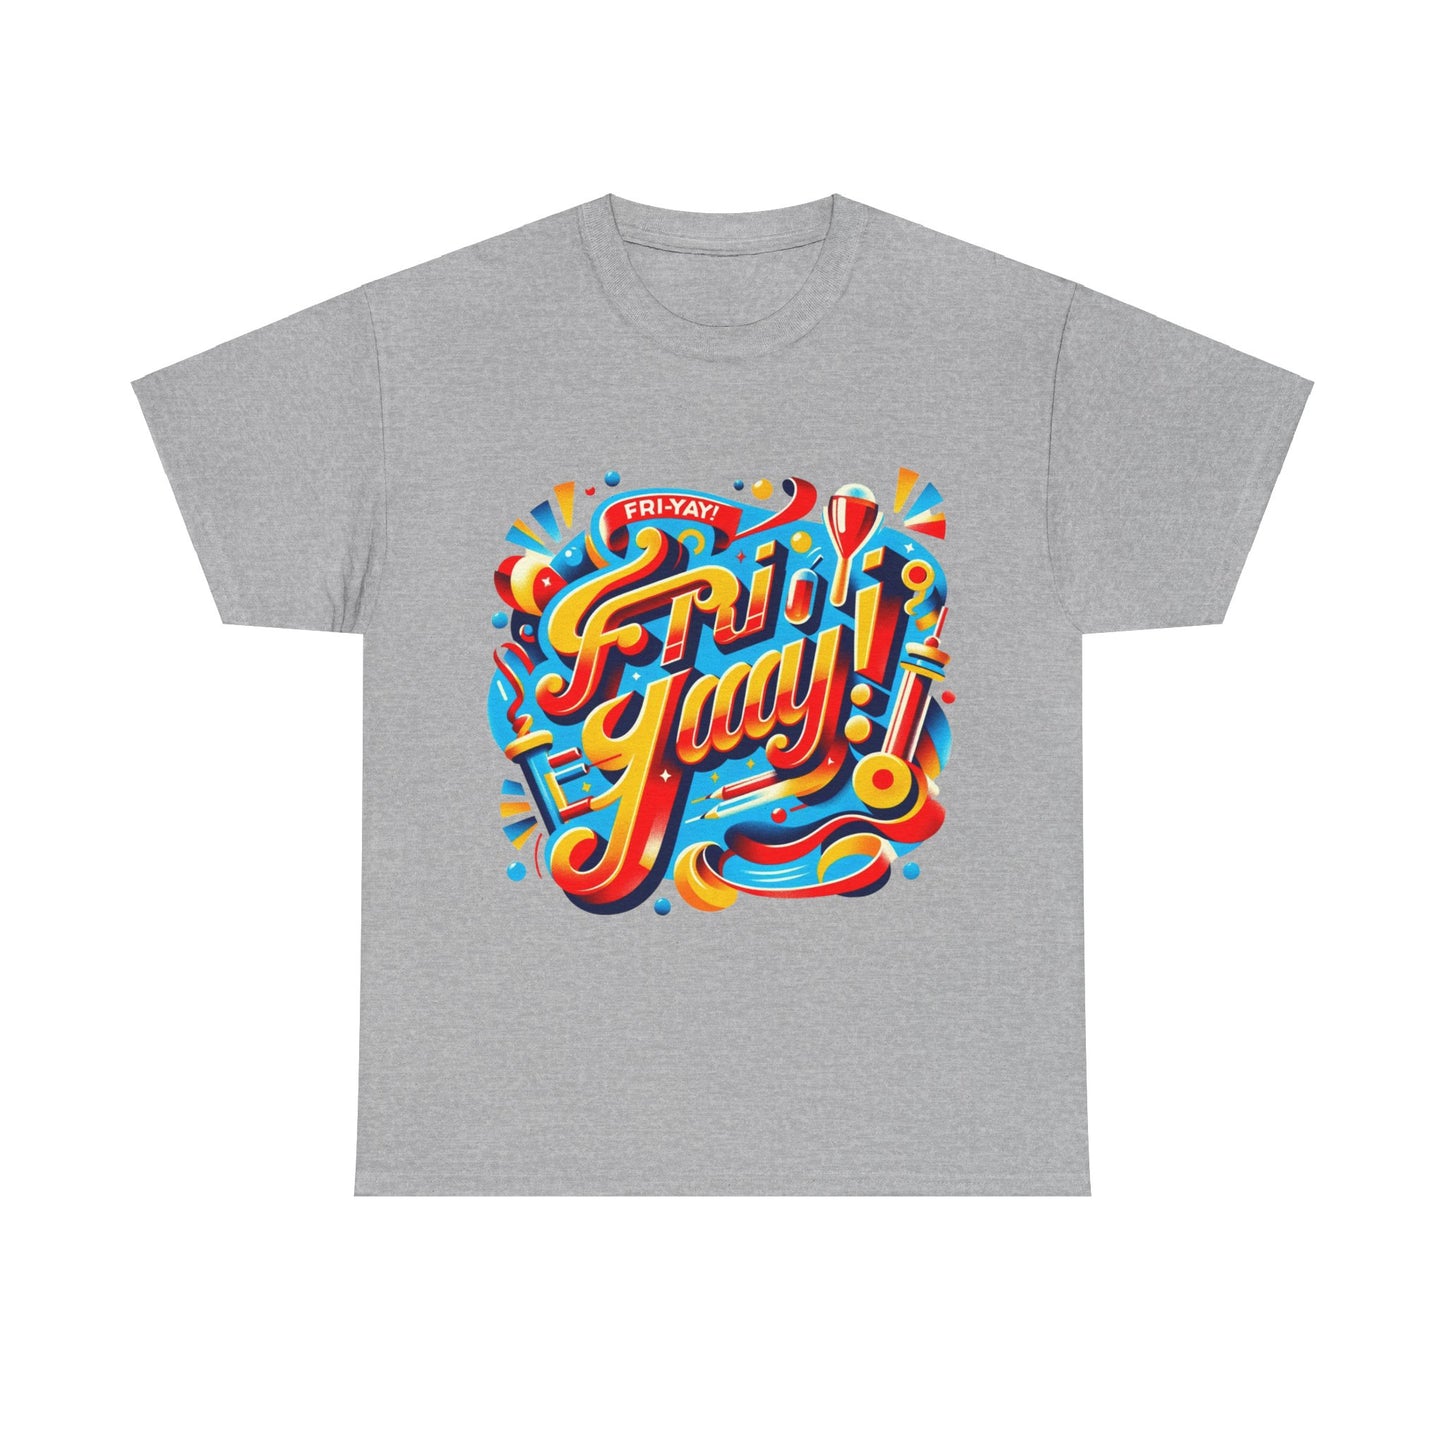 Buy 'FRI-YAY!' T-Shirt – Celebrate Every Weekend with Vibrant Pin-Up Style!